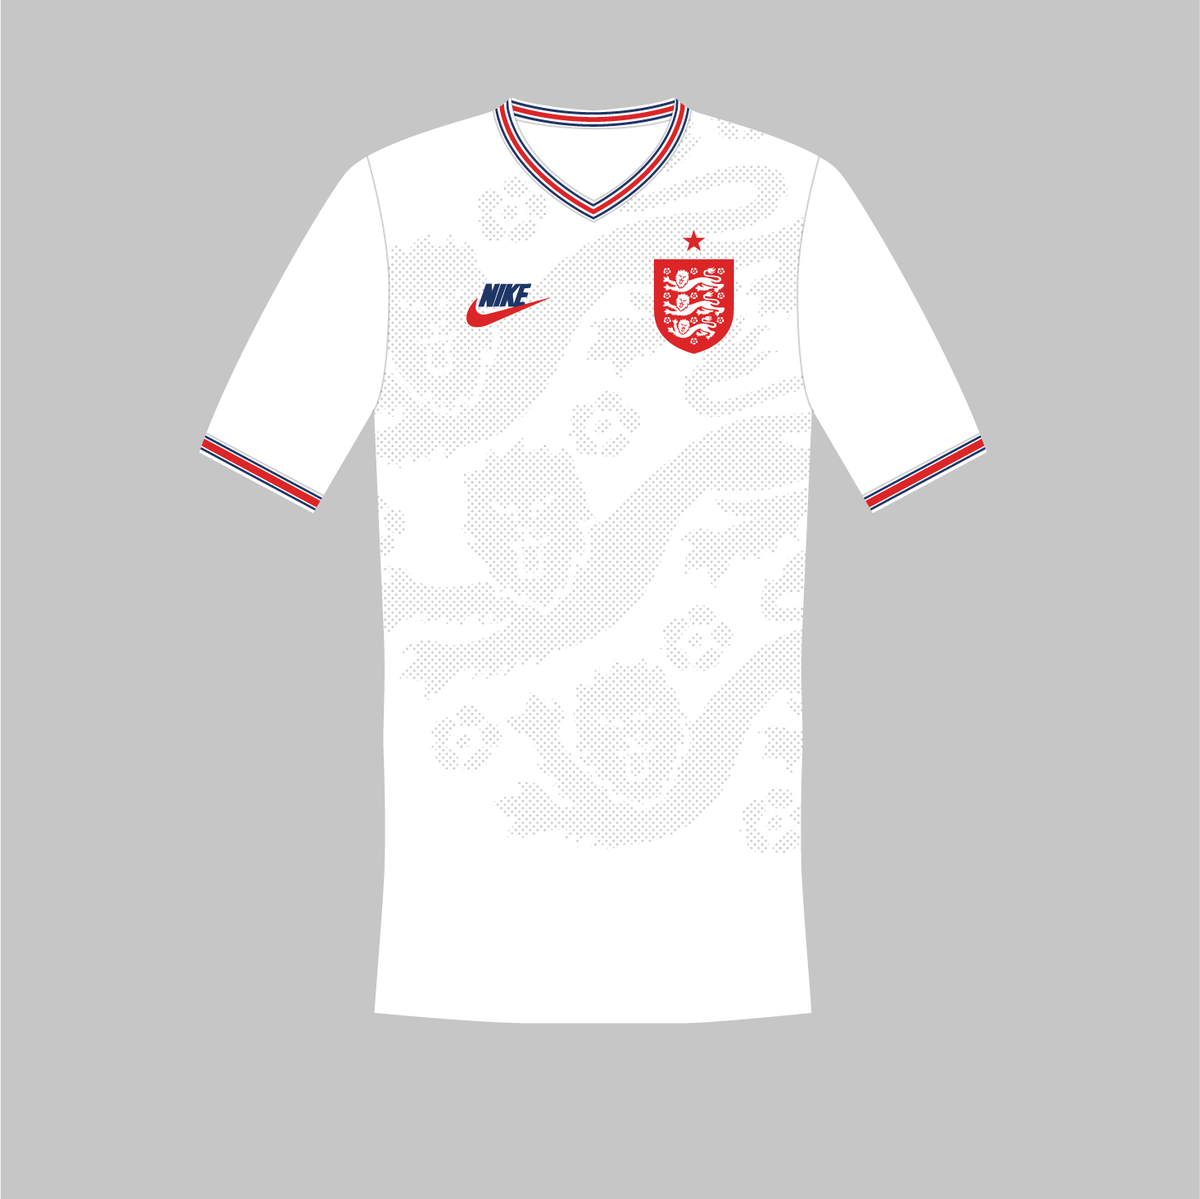 Jack Henderson Ø¹Ù„Ù‰ ØªÙˆÙŠØªØ± So Here It Is My Final Design Of 2018 And A Teaser Of What S To Come In 2019 A Beta Preview Of My Road To Euro 2020 Kit For